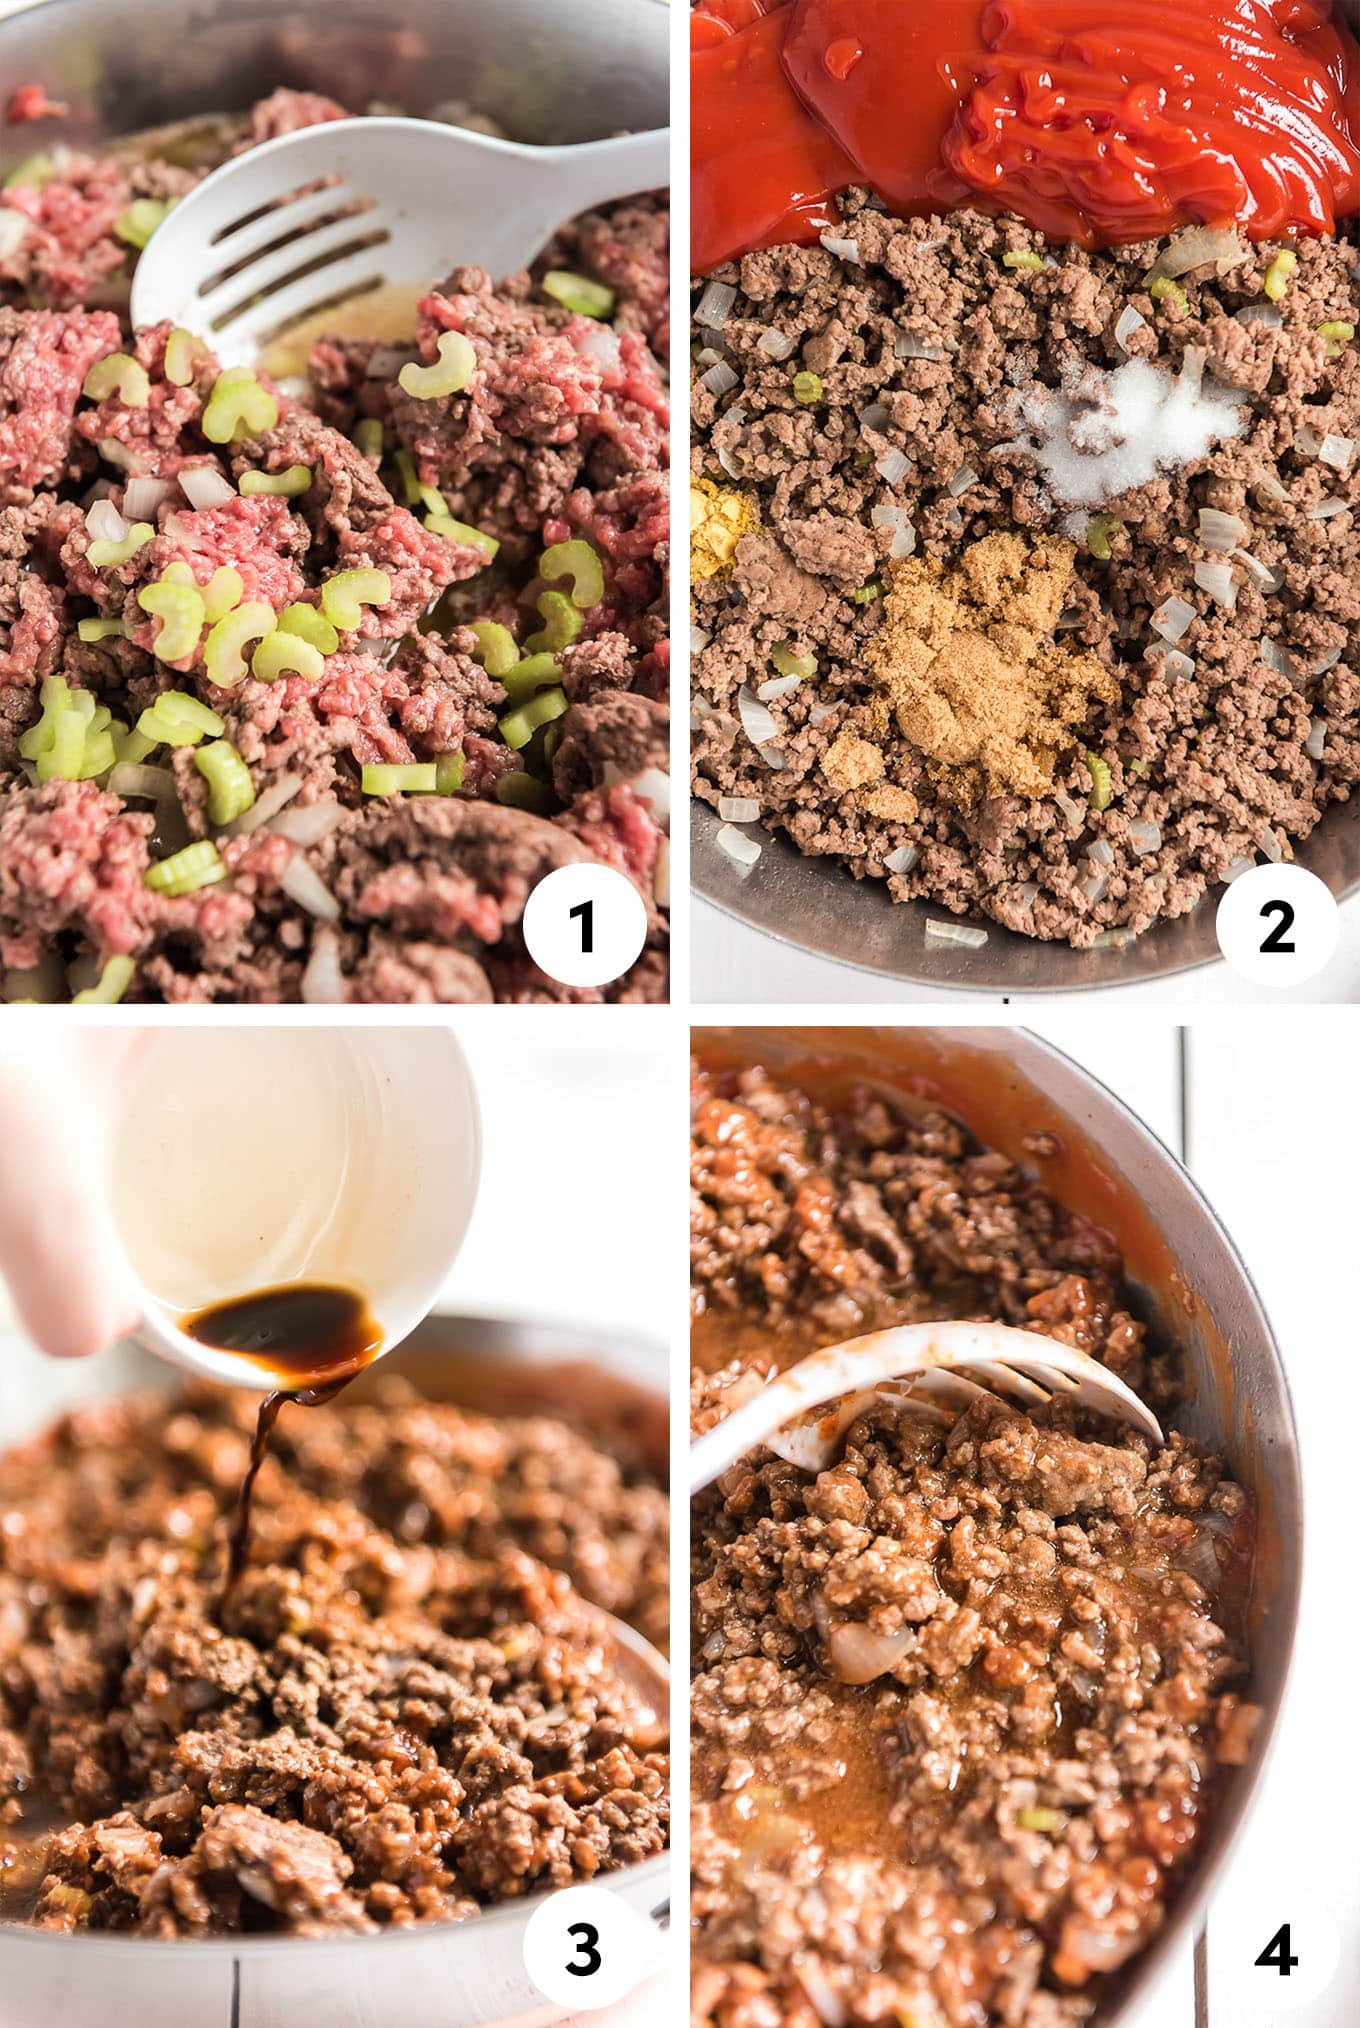 A collage of images showing how to make sloppy joe sauce from browning meat to adding all the ingredients.